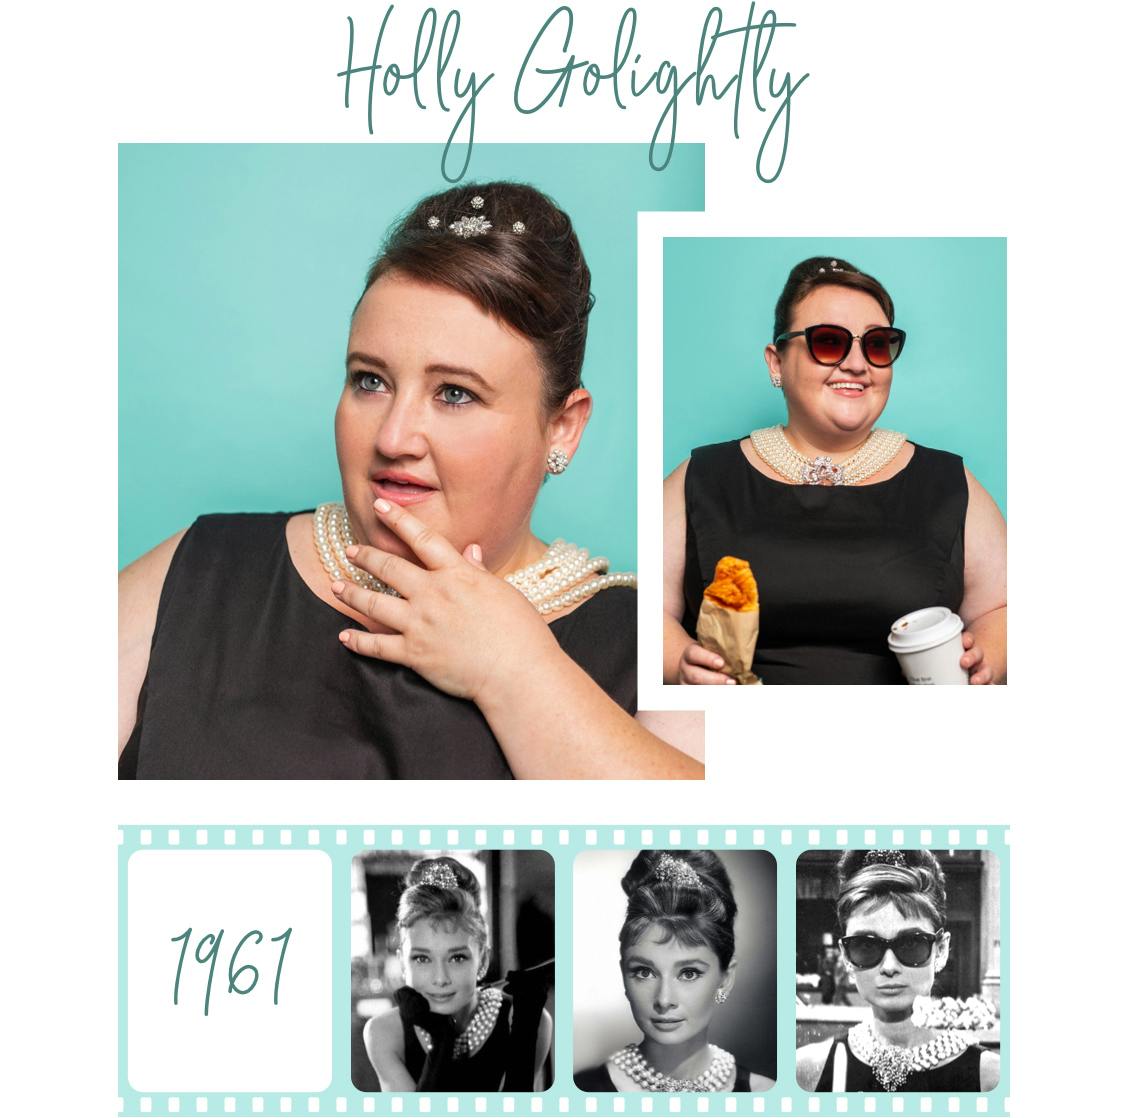 Image of esalon employee as holly golightly from breakfast at tiffany's with images of orignal look from 1961 below